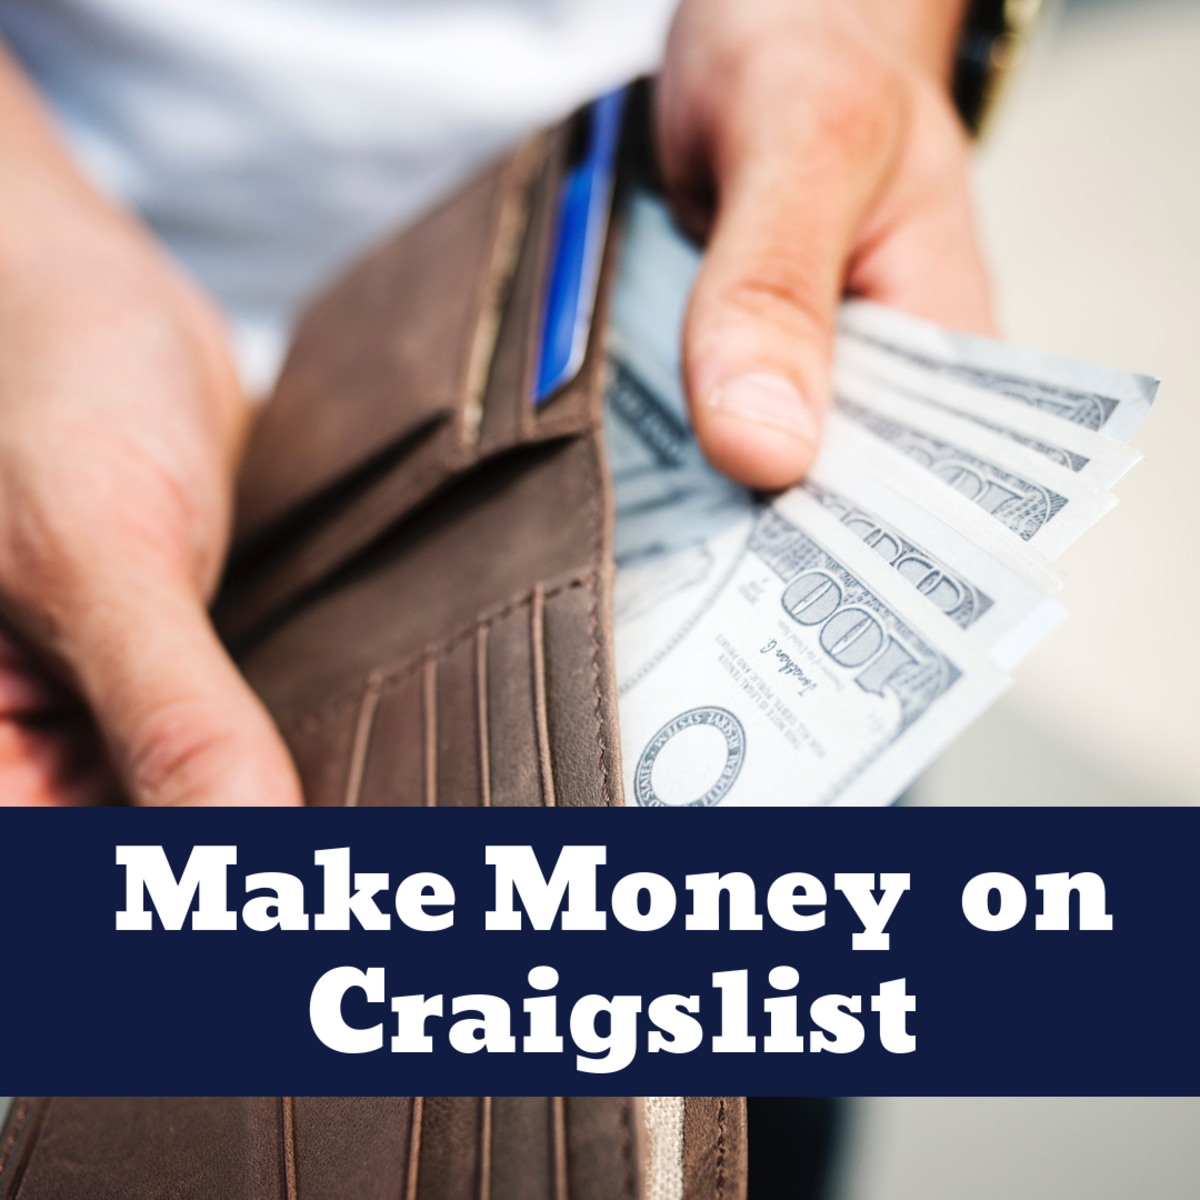 How to Make Money on Craigslist | ToughNickel